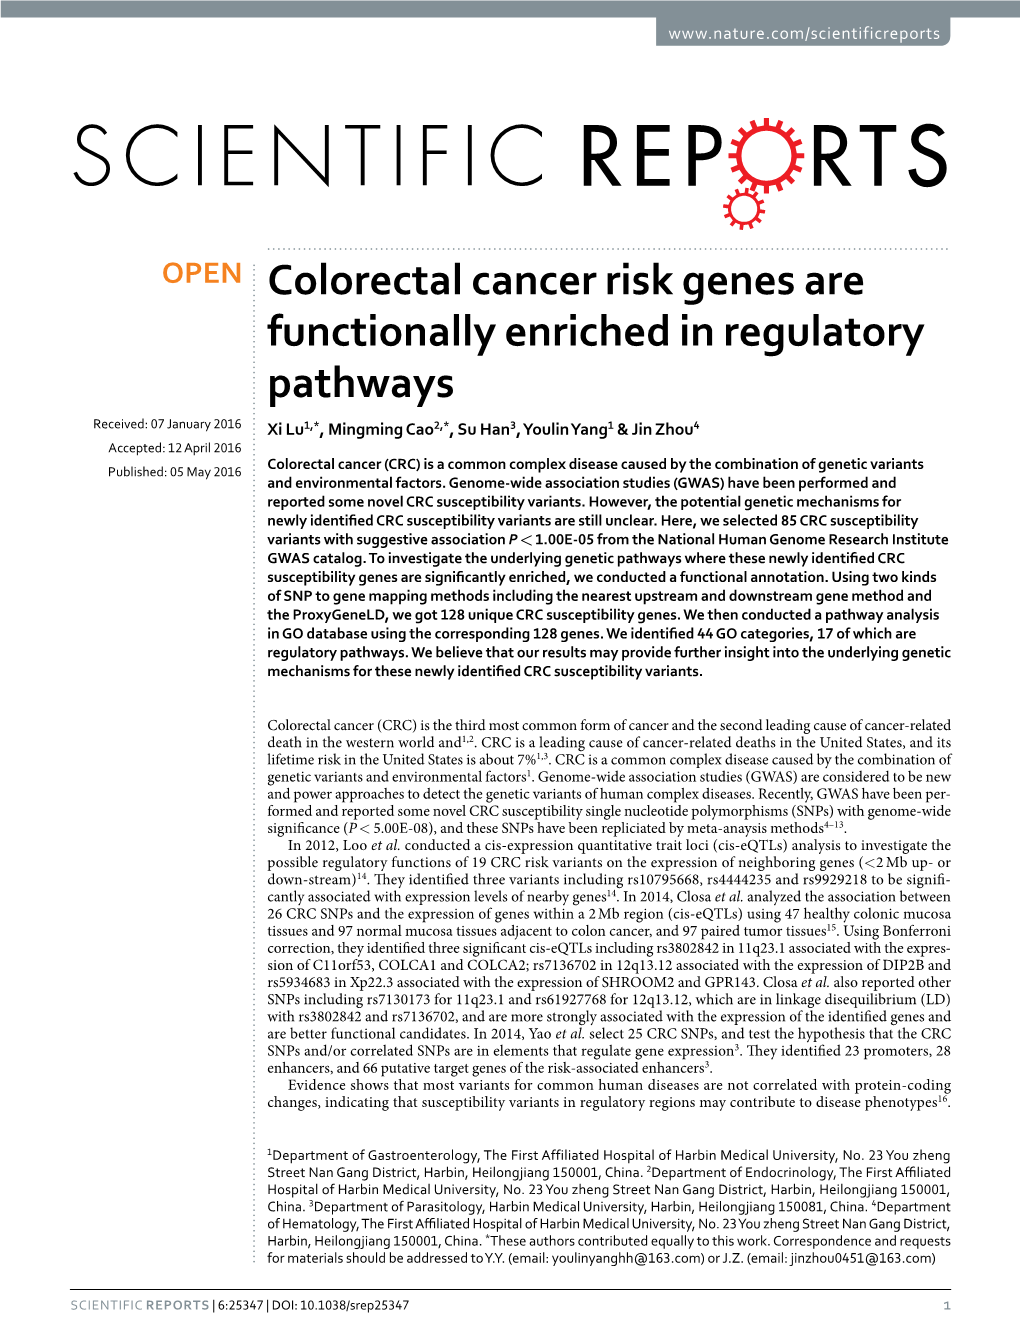 Colorectal Cancer Risk Genes Are Functionally Enriched in Regulatory